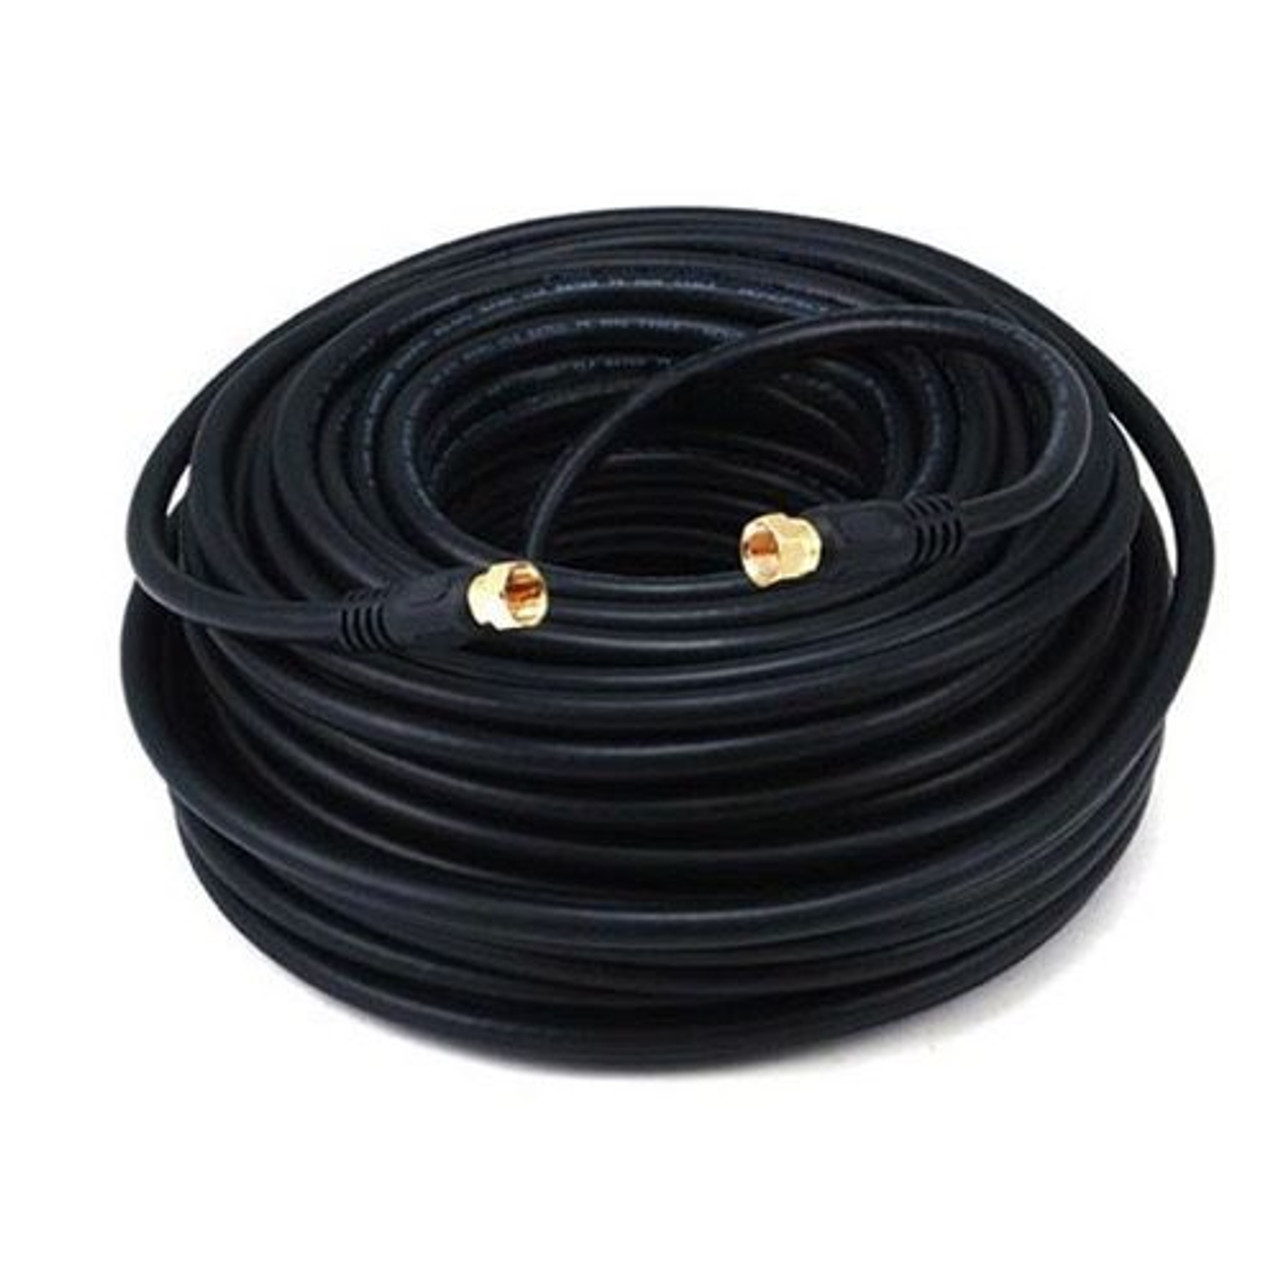 Eagle 75 FT RG6 Coaxial Cable Black 2200 MHz 75 Ohm with Brass F-Connector With Weatherproof O-Ring Silicon Sealed Satellite RG-6 Coax Cable Digital TV Signal Distribution Line Video Jumper